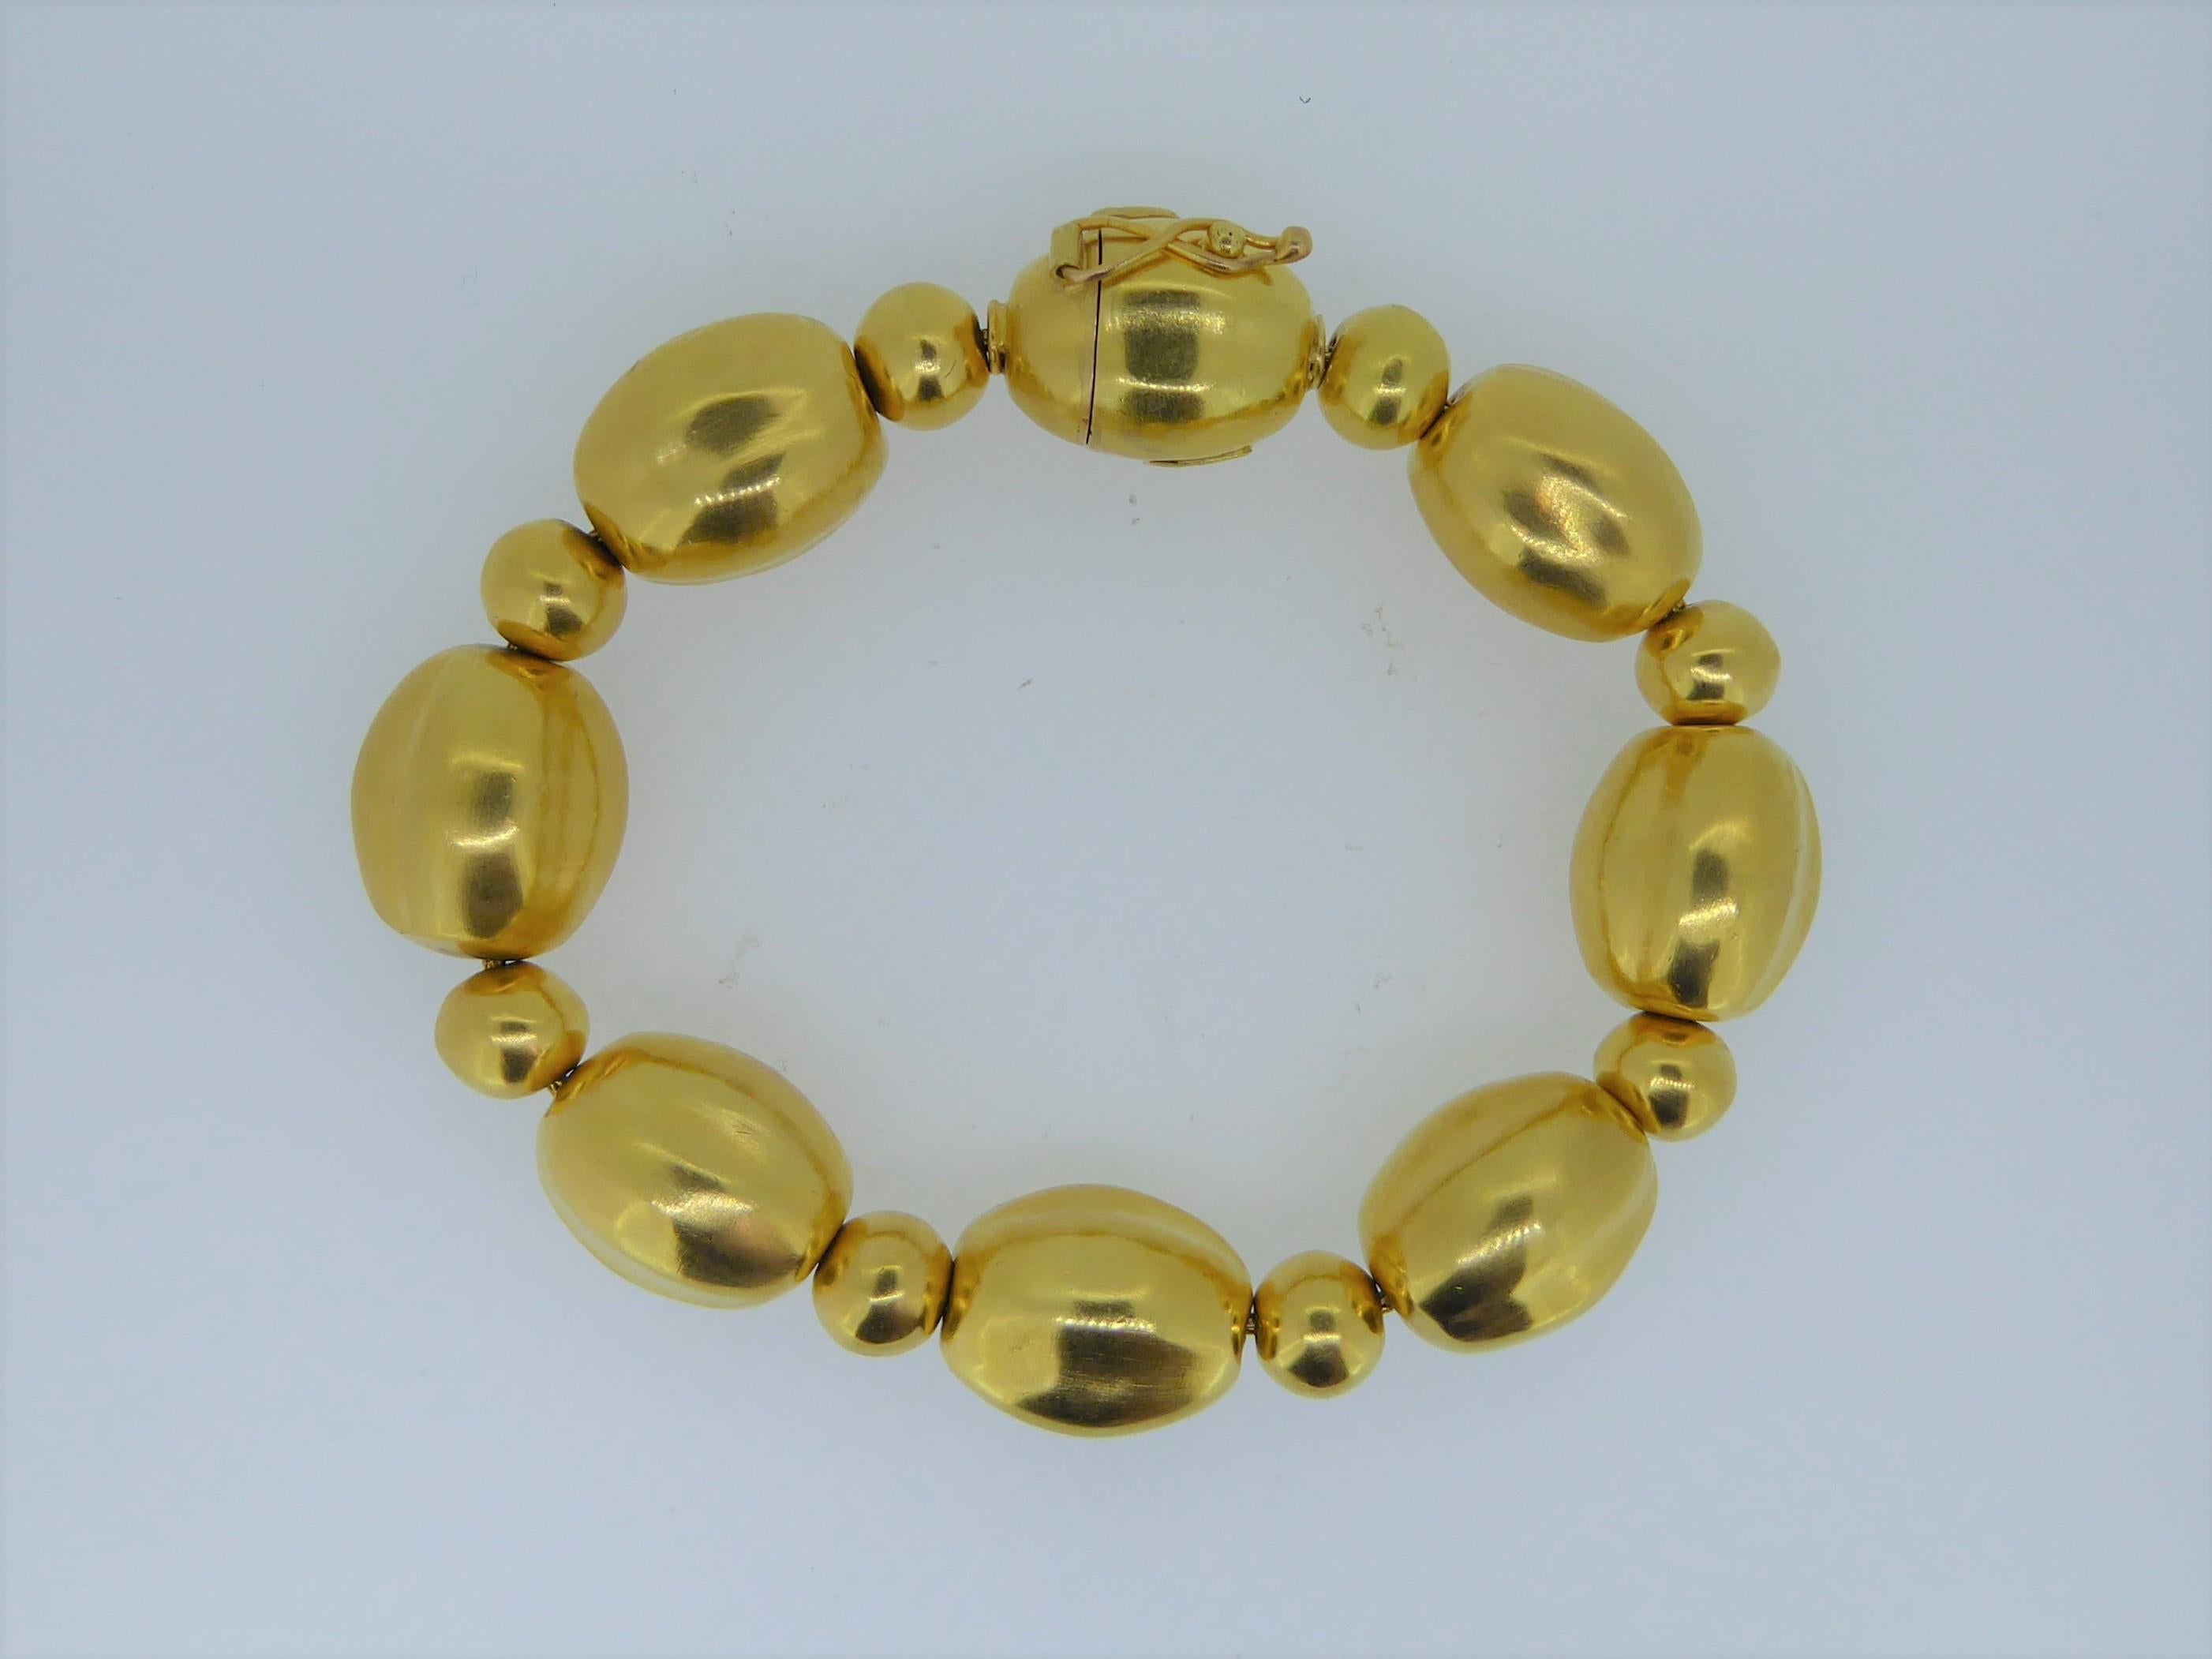 A Lalaounis 22 Carat Yellow Gold Minoan Bead Bracelet Bangle. Circa 1970s. The alternating beads with 22ct hand-woven chain. Stamped 